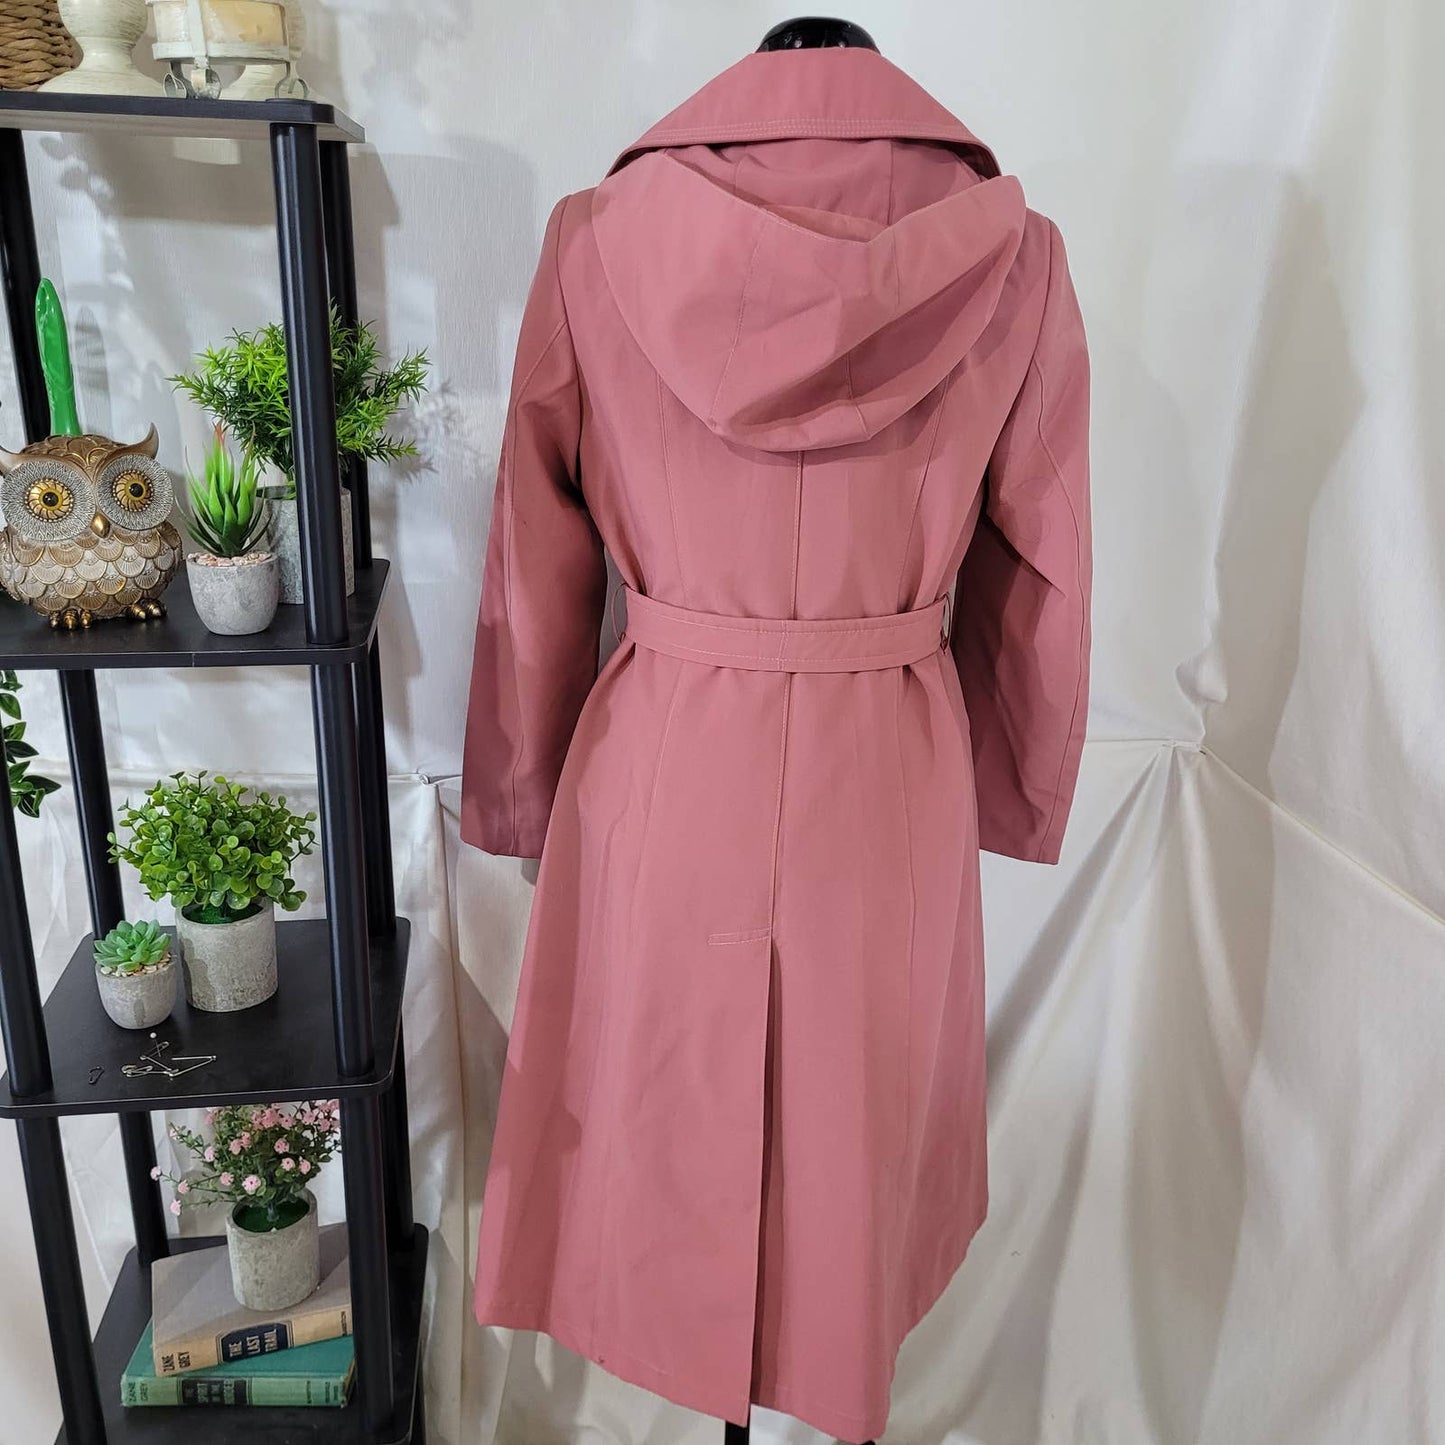 Vintage 1960s 1070s Betty Barclay Pink Trench Coat with Removable Hood - Medium